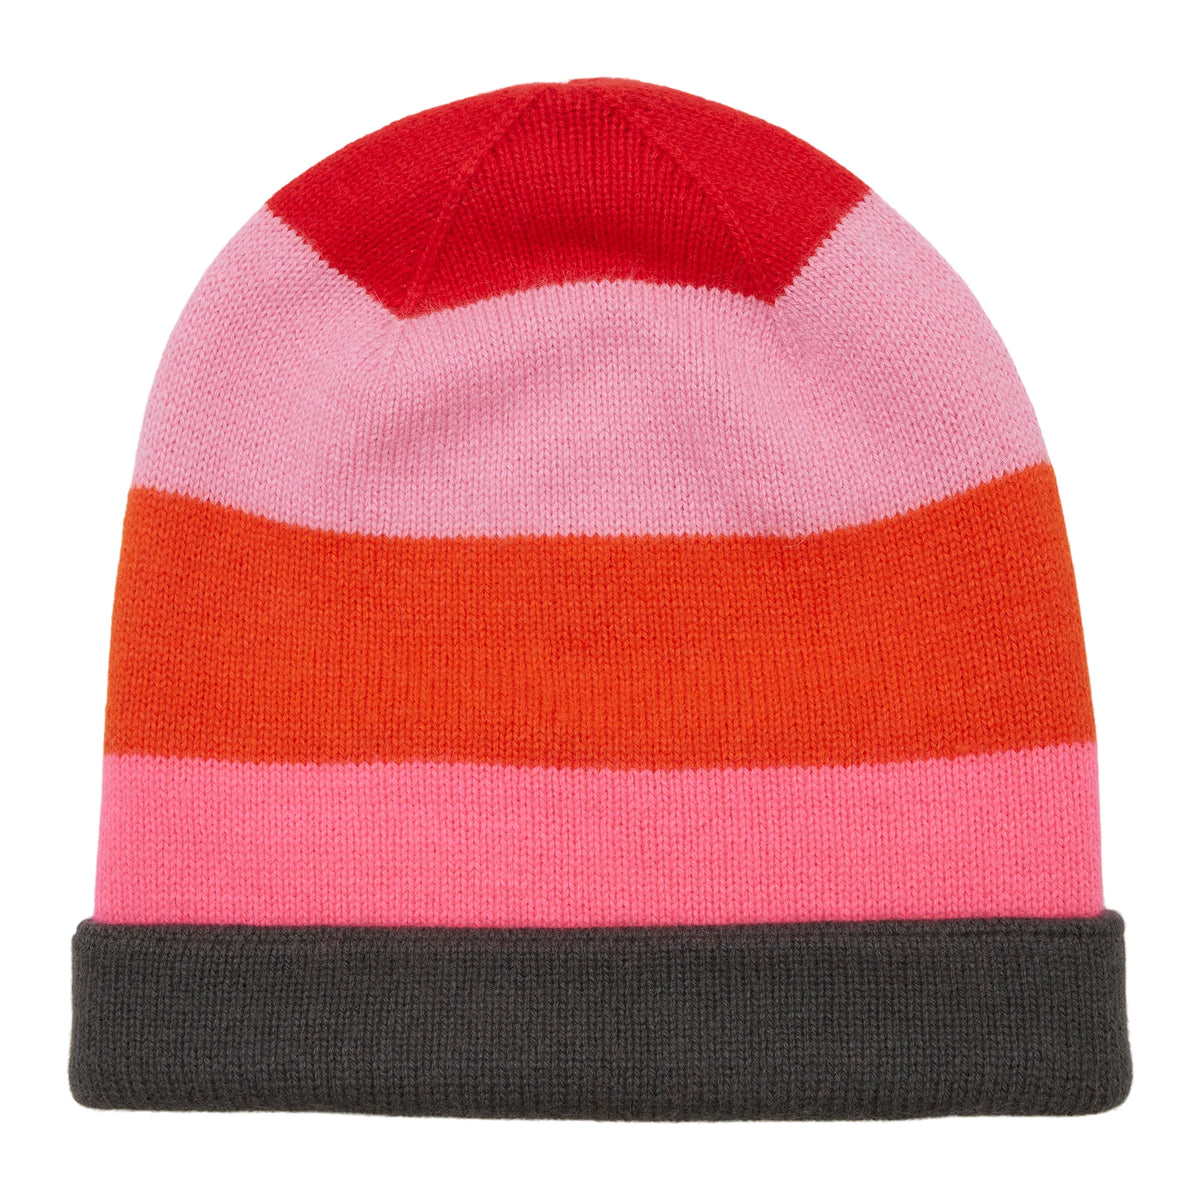 Colour block cashmere beanie in red pink oranges and grey